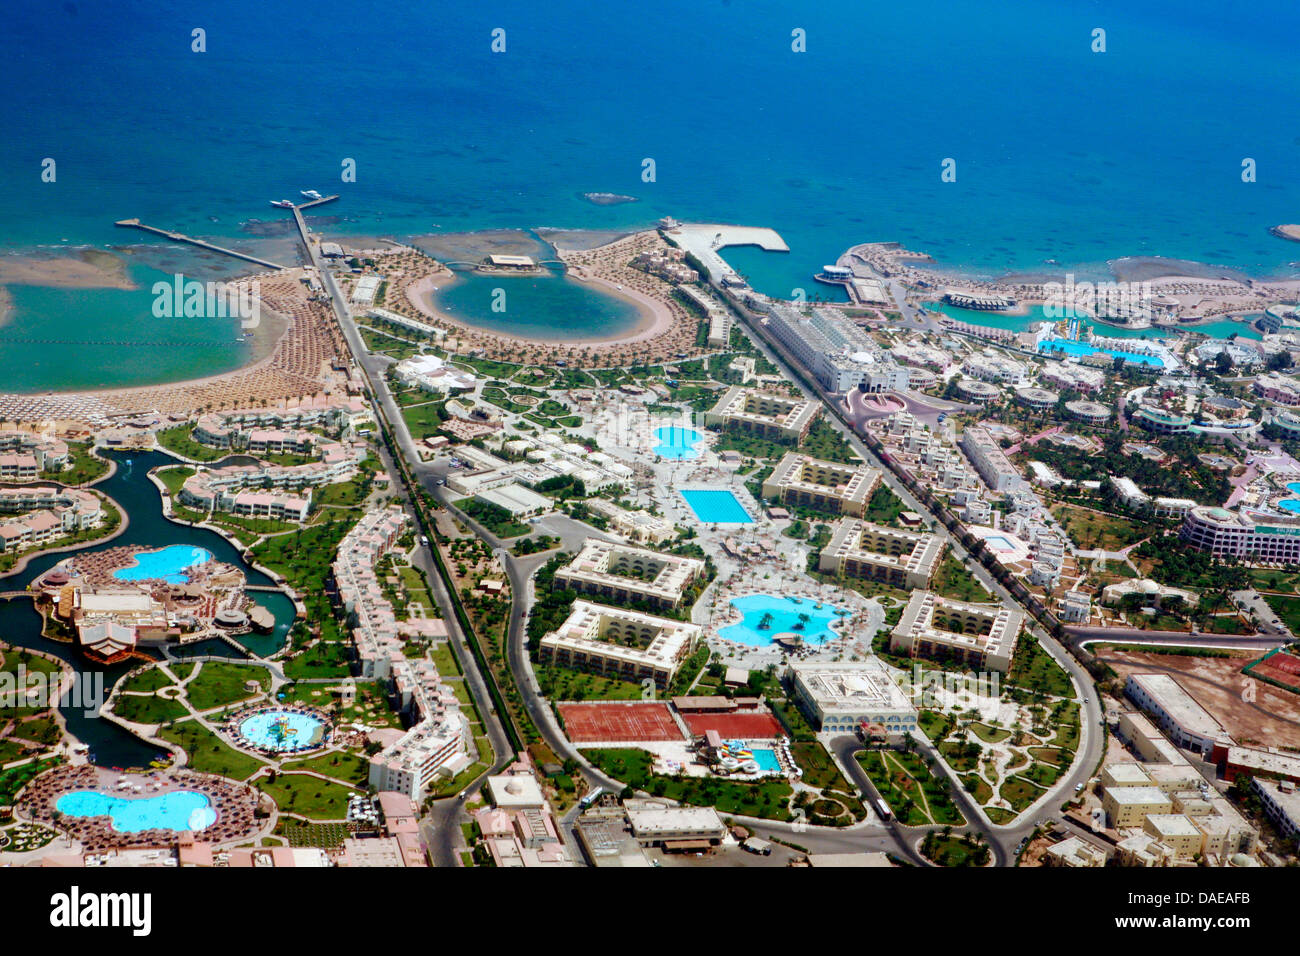 aerial view to hotel complex at the Red Sea coast, Egypt, Hurghada Stock Photo